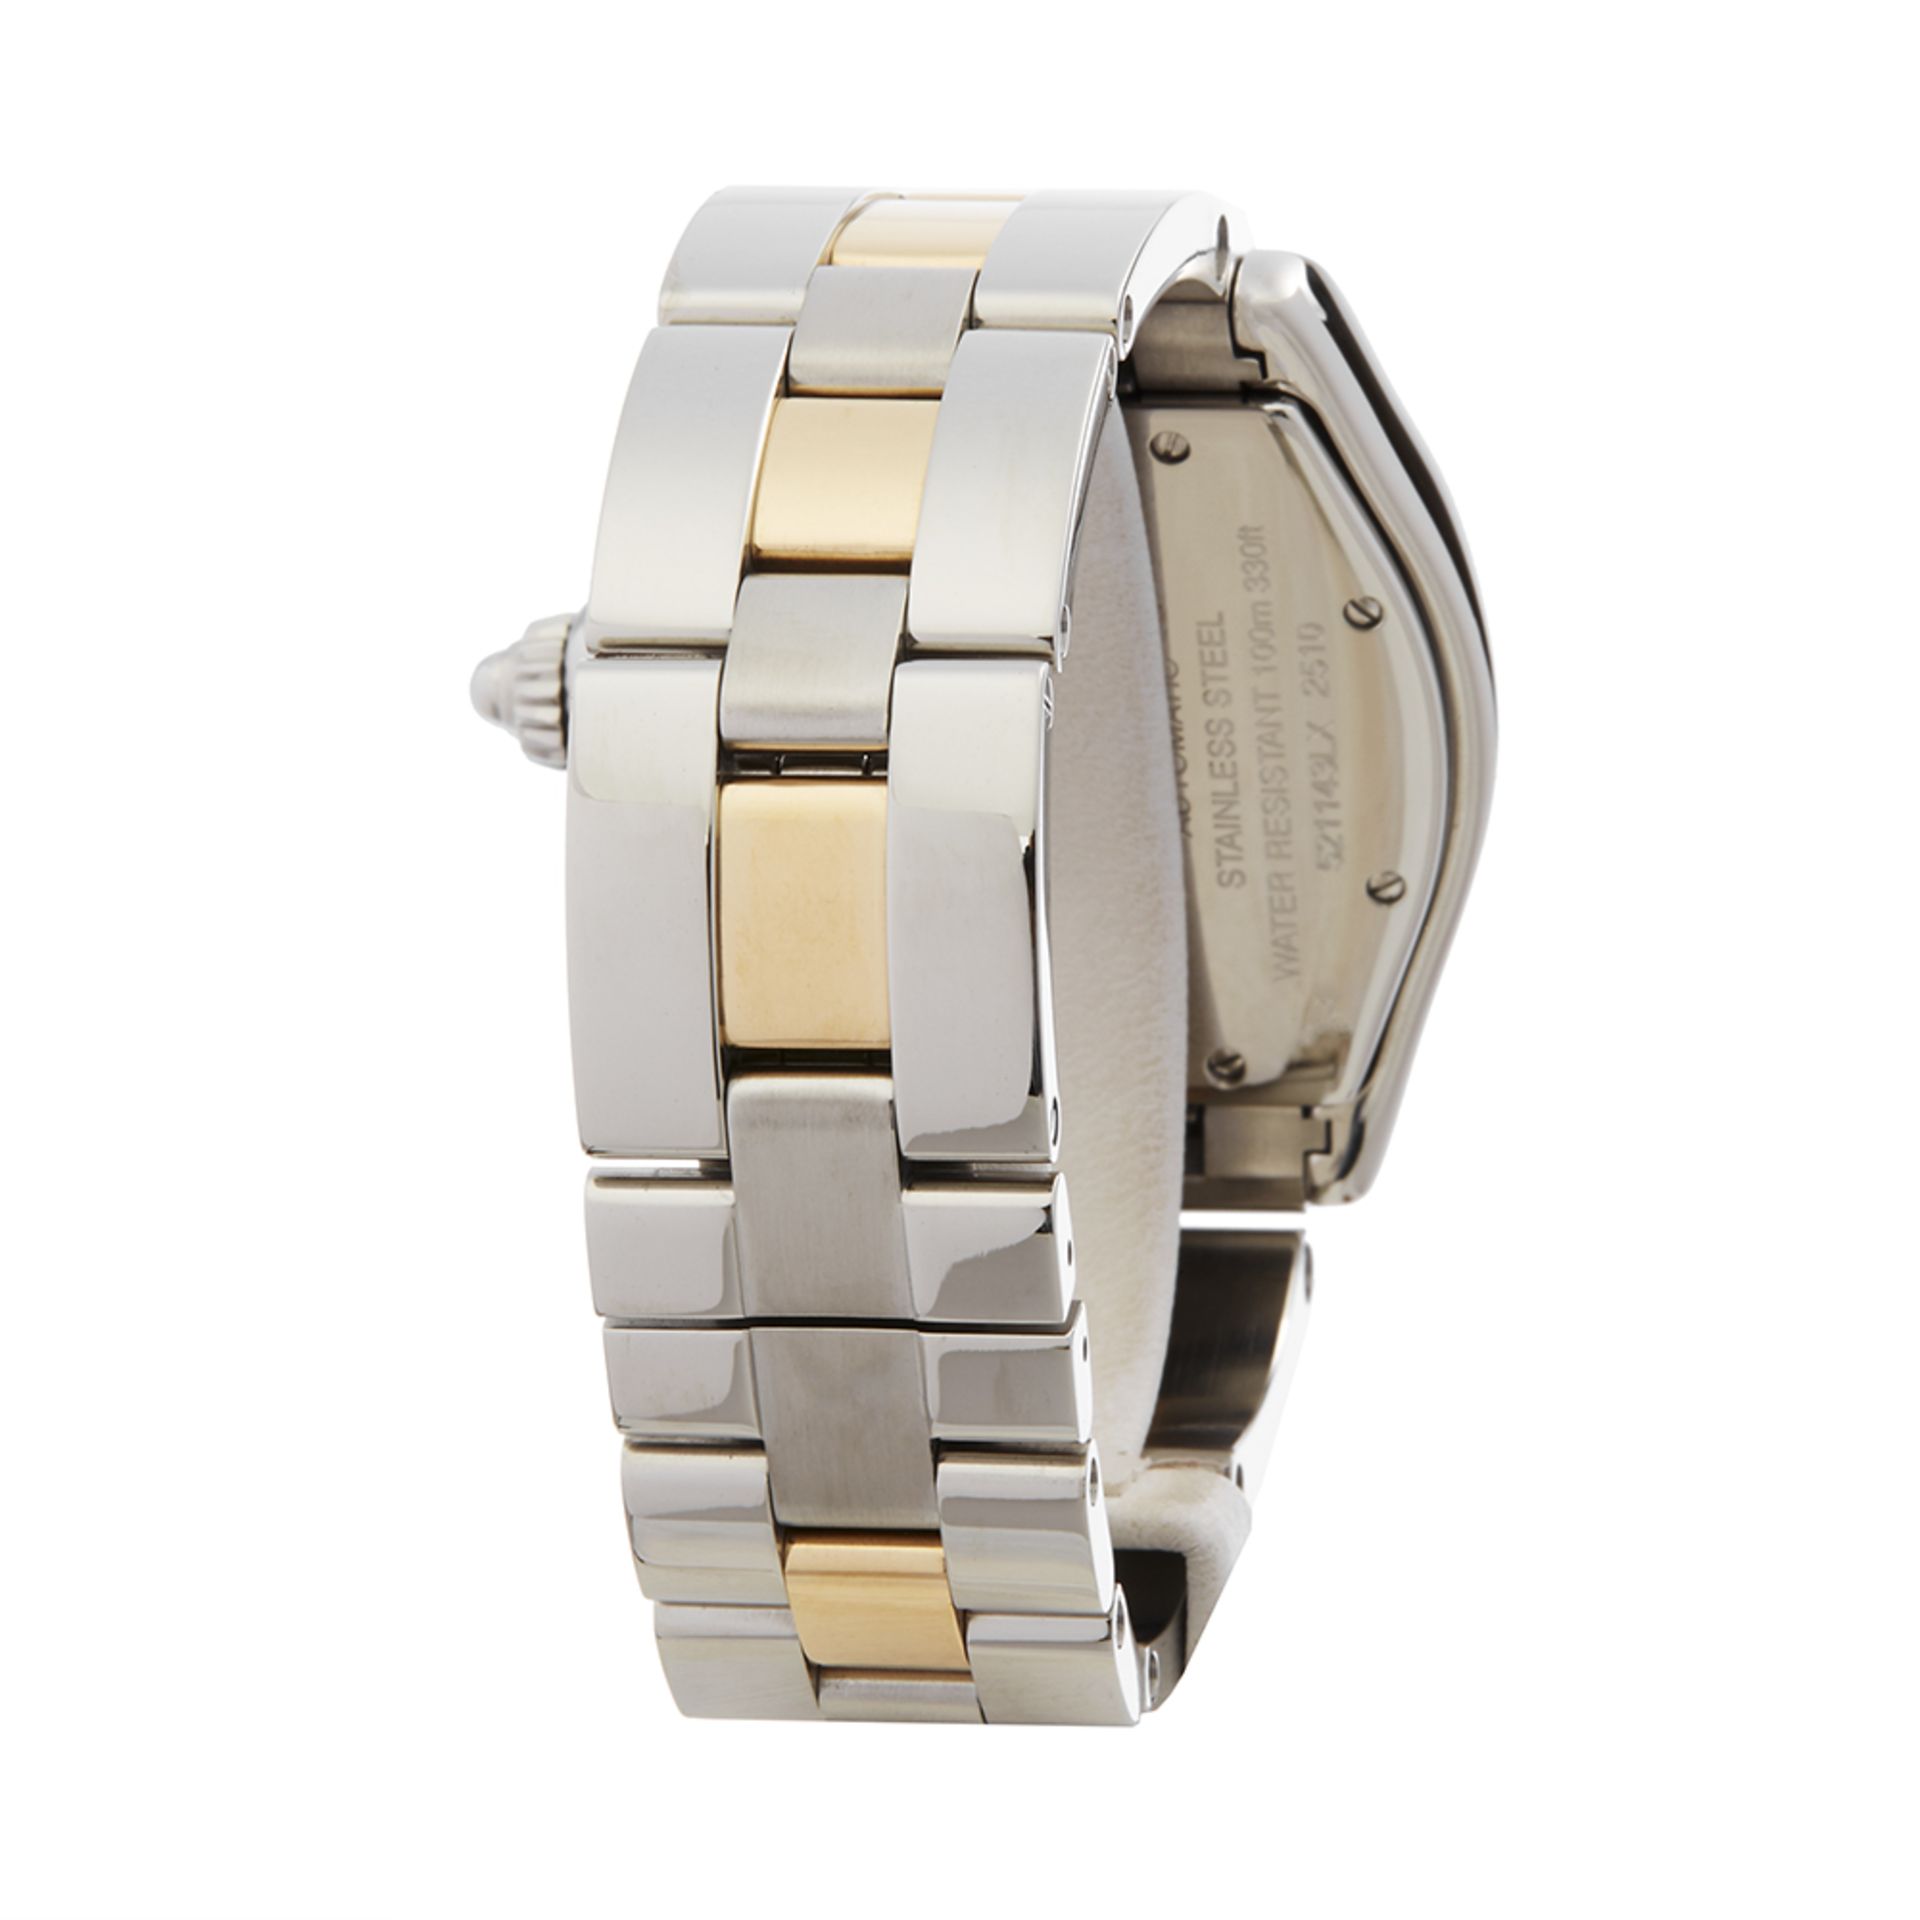 2010 Cartier Roadster Stainless Steel & 18K Yellow Gold - 2510 or W62031Y4 - Image 8 of 9